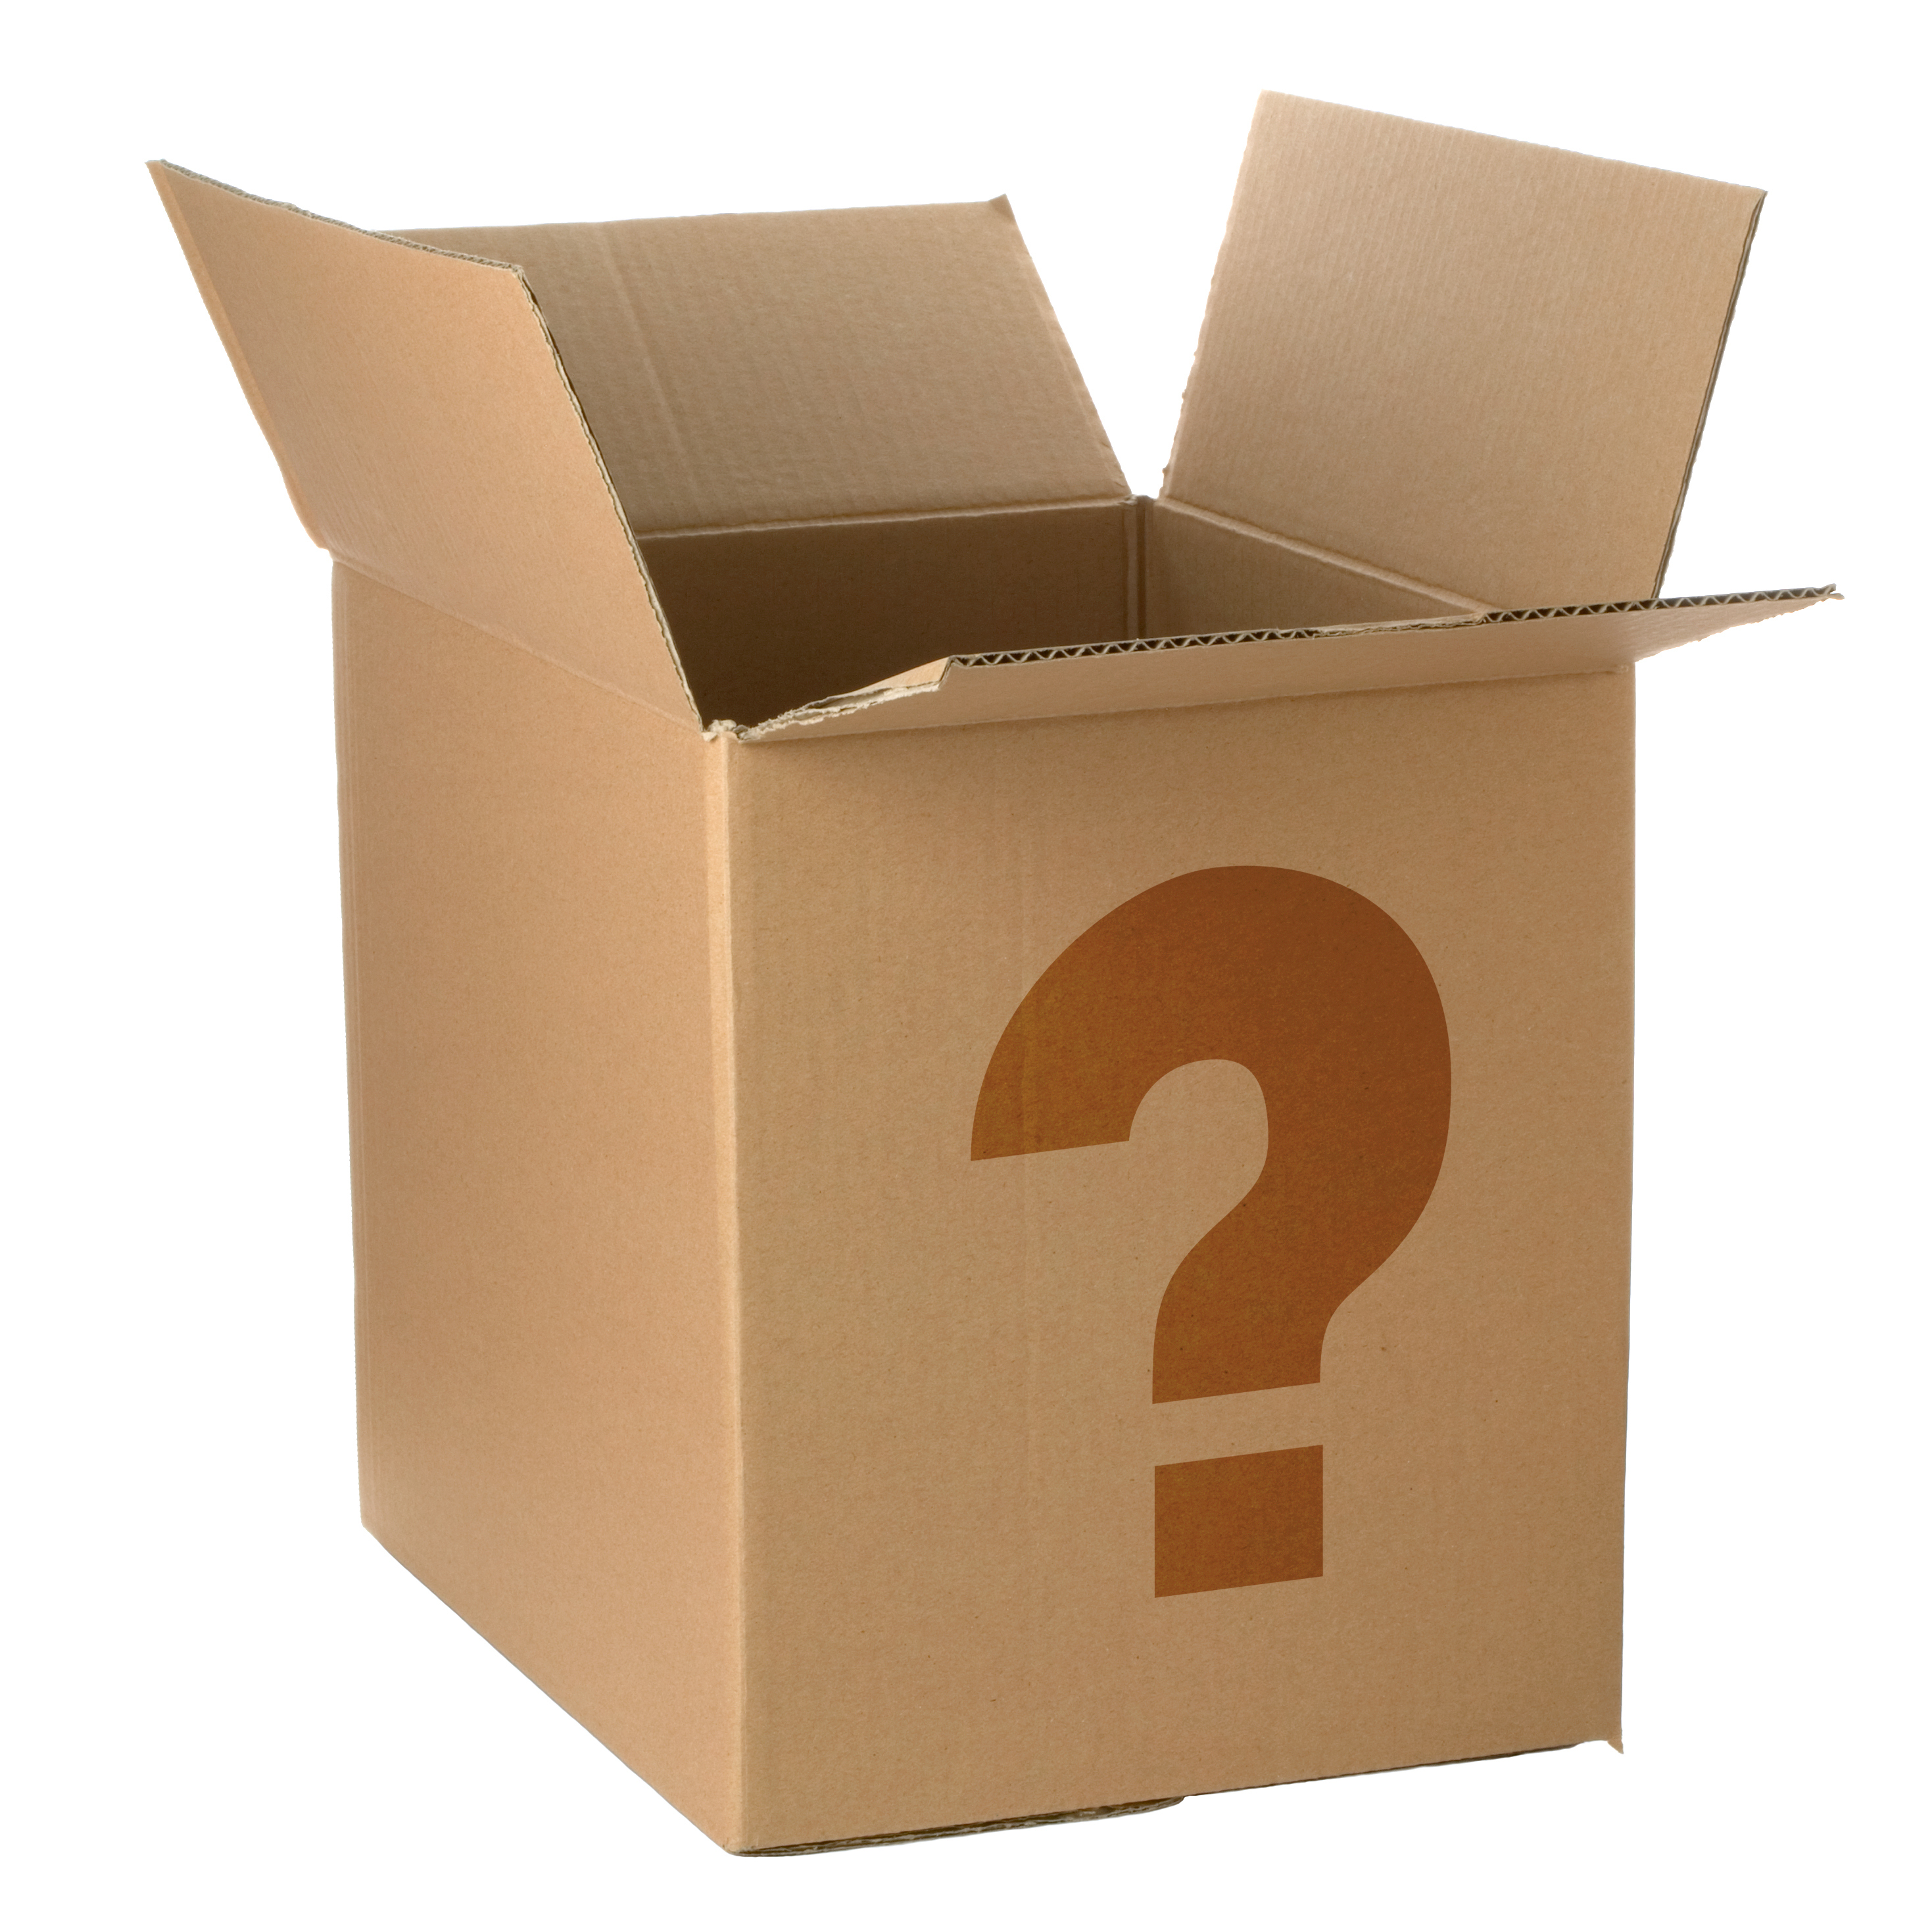 What’s ‘In the Box’ With Any VMS?